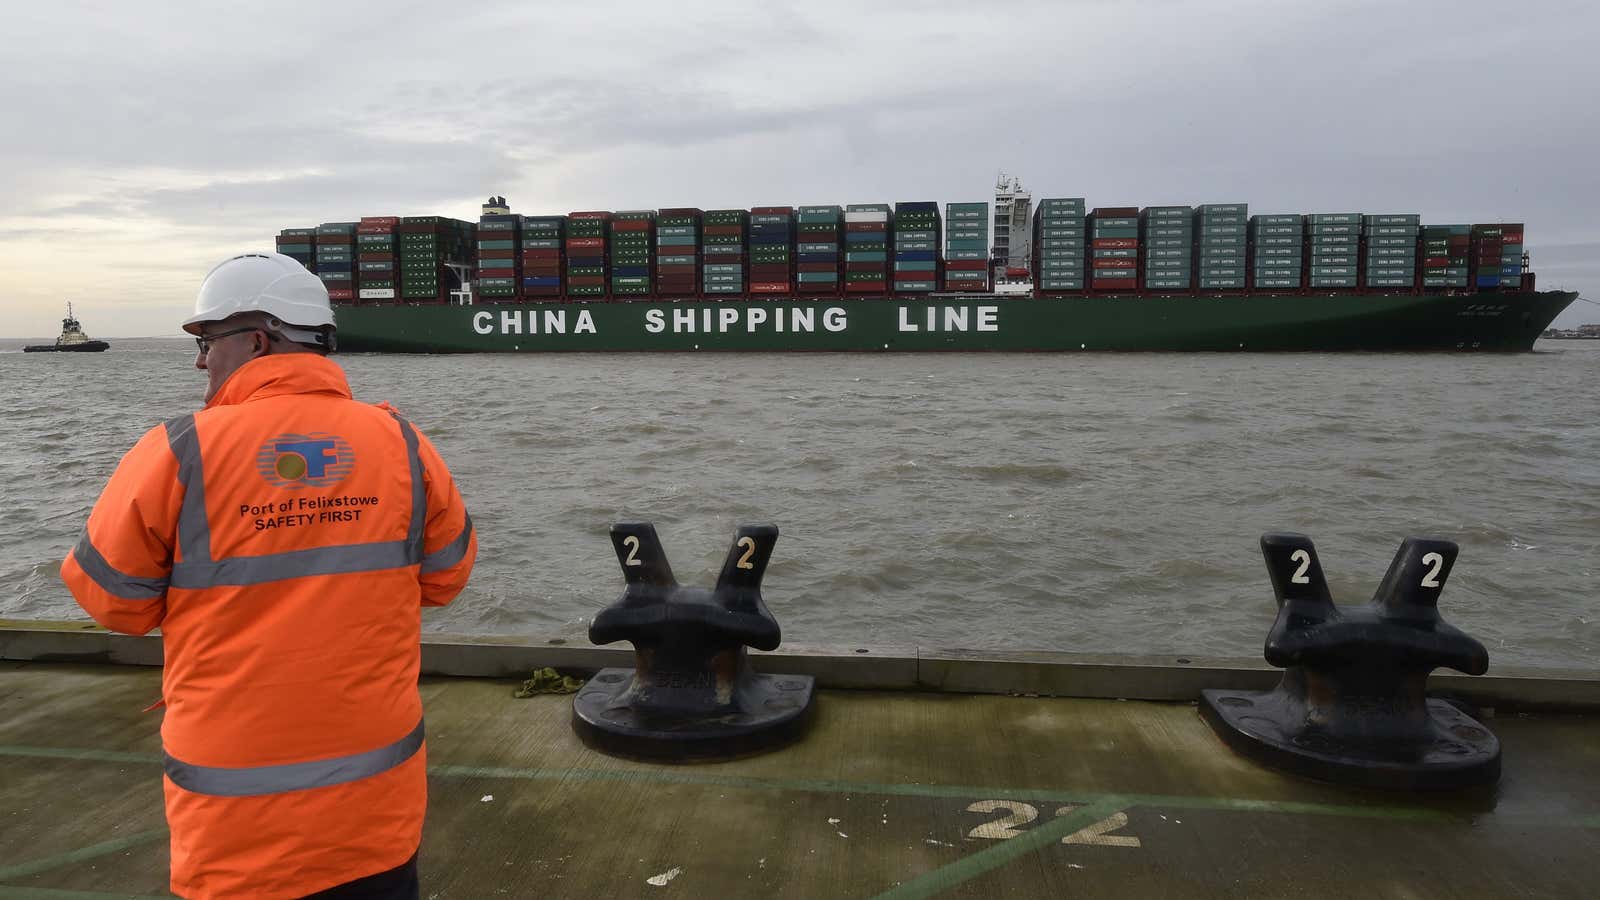 Trade in goods between the UK and China is on an upward trend in spite of Covid-19.